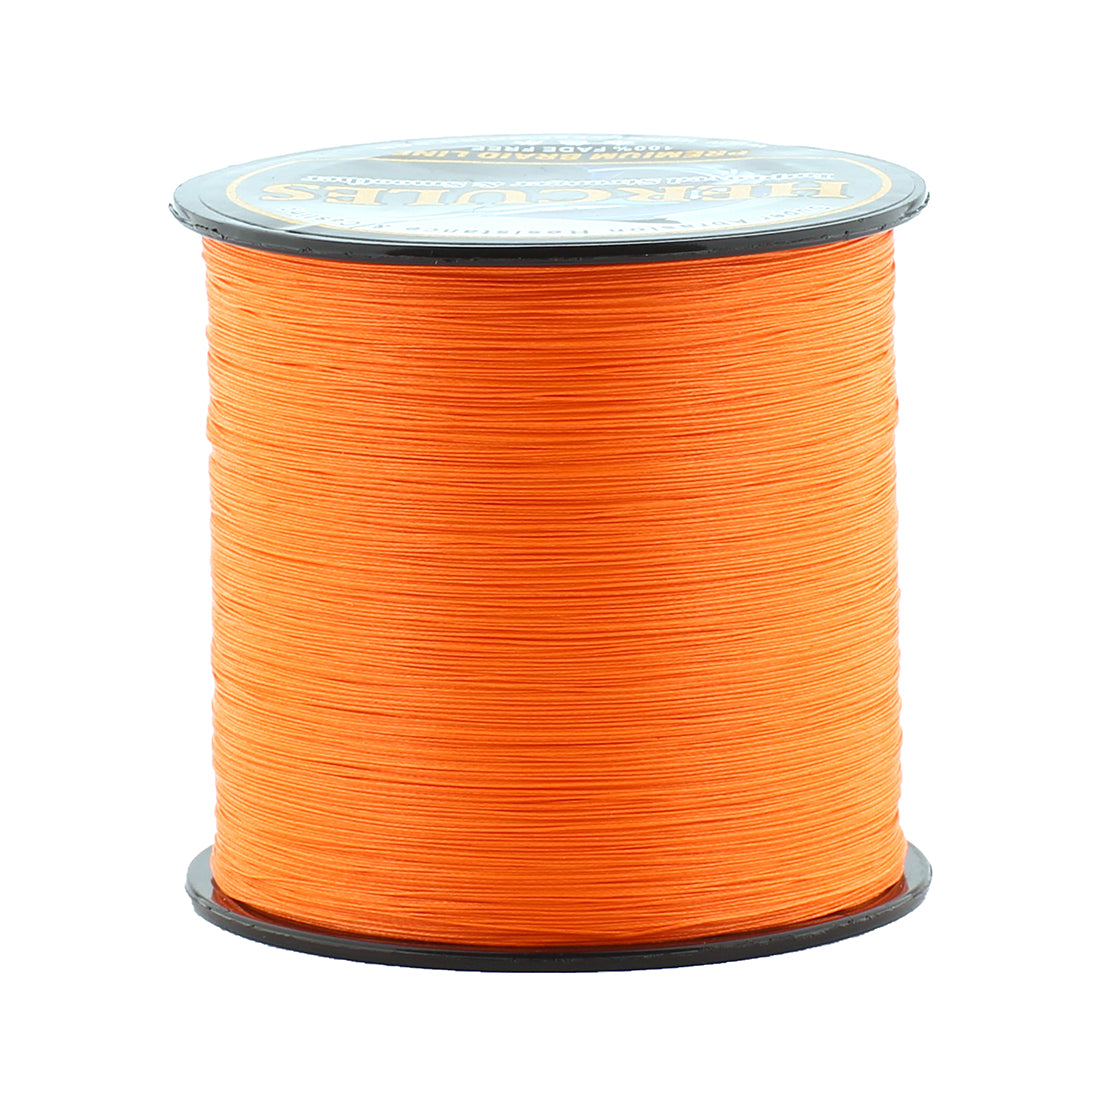 JOSBY 8 Braided Fishing Line Fishing Line 1000M Multifilament PE 4 Strands  Fishing Cord With Strong Japan Technology, Orange, 10LB 85LB 230718 From  Nian07, $8.5